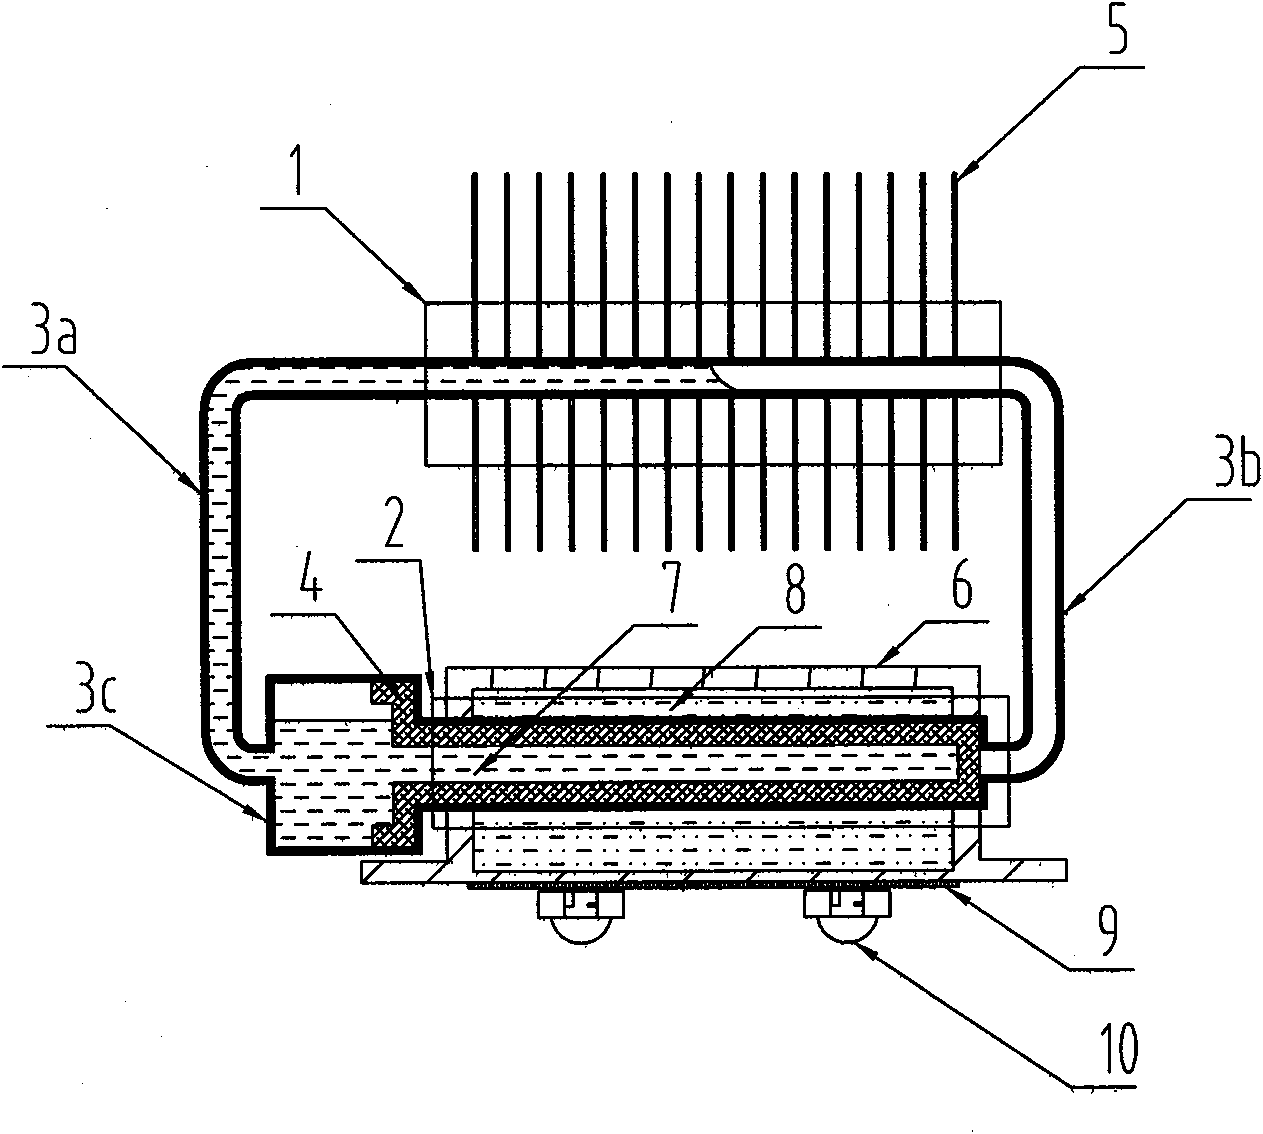 Heat radiation device of heat pipe of loop of temperature-equalization tank with high heat conductivity